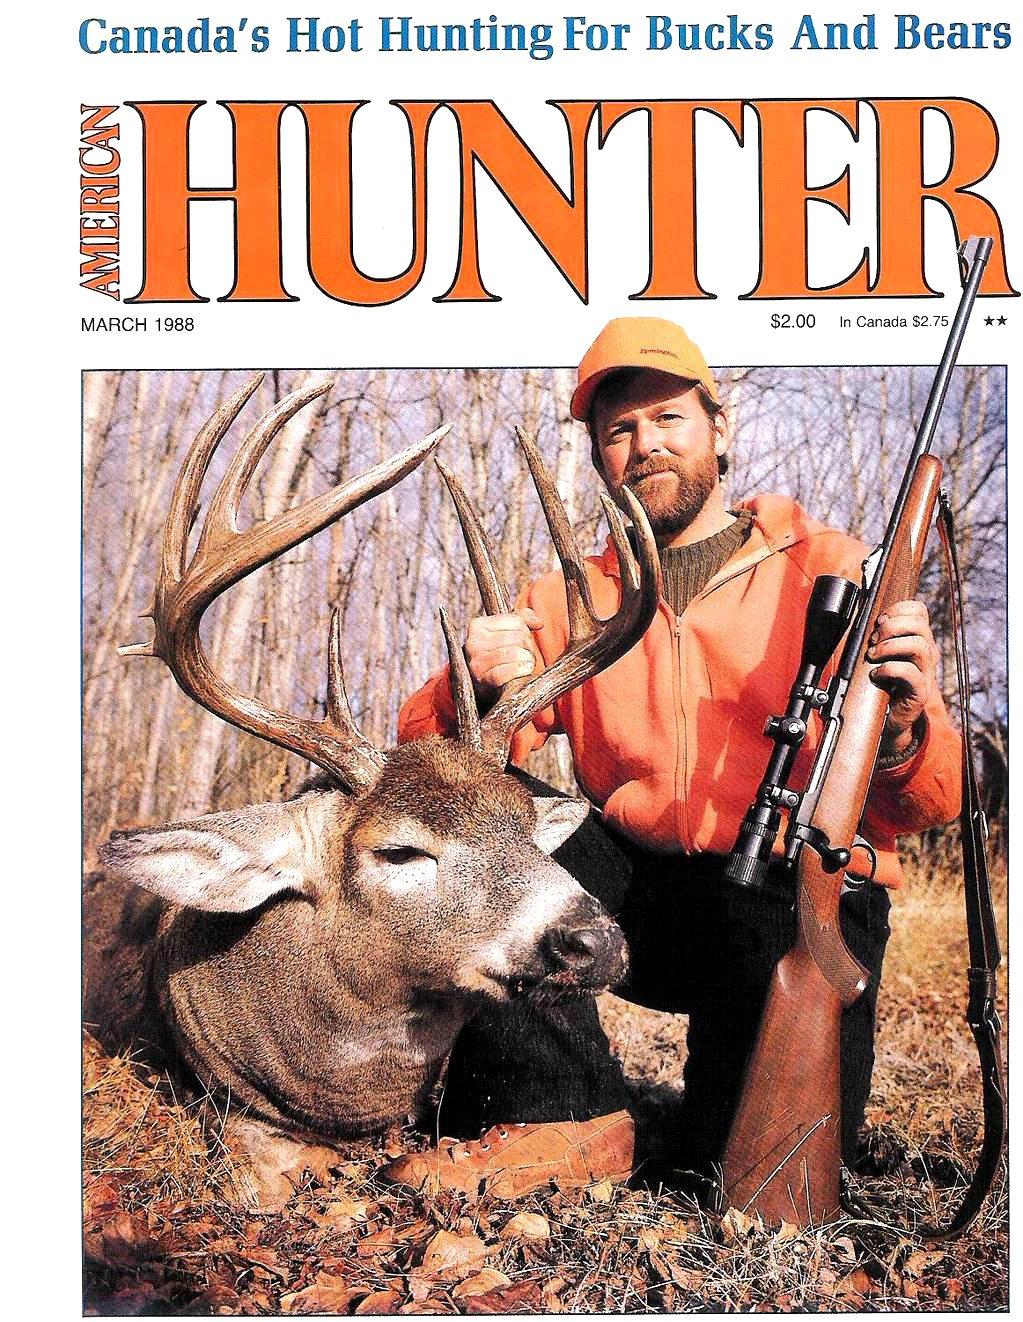 Hanback killed his first Saskatchewan giant, 170 inches strong, in 1987, and he has been hunting the north country ever since. Image by Mike Hanback